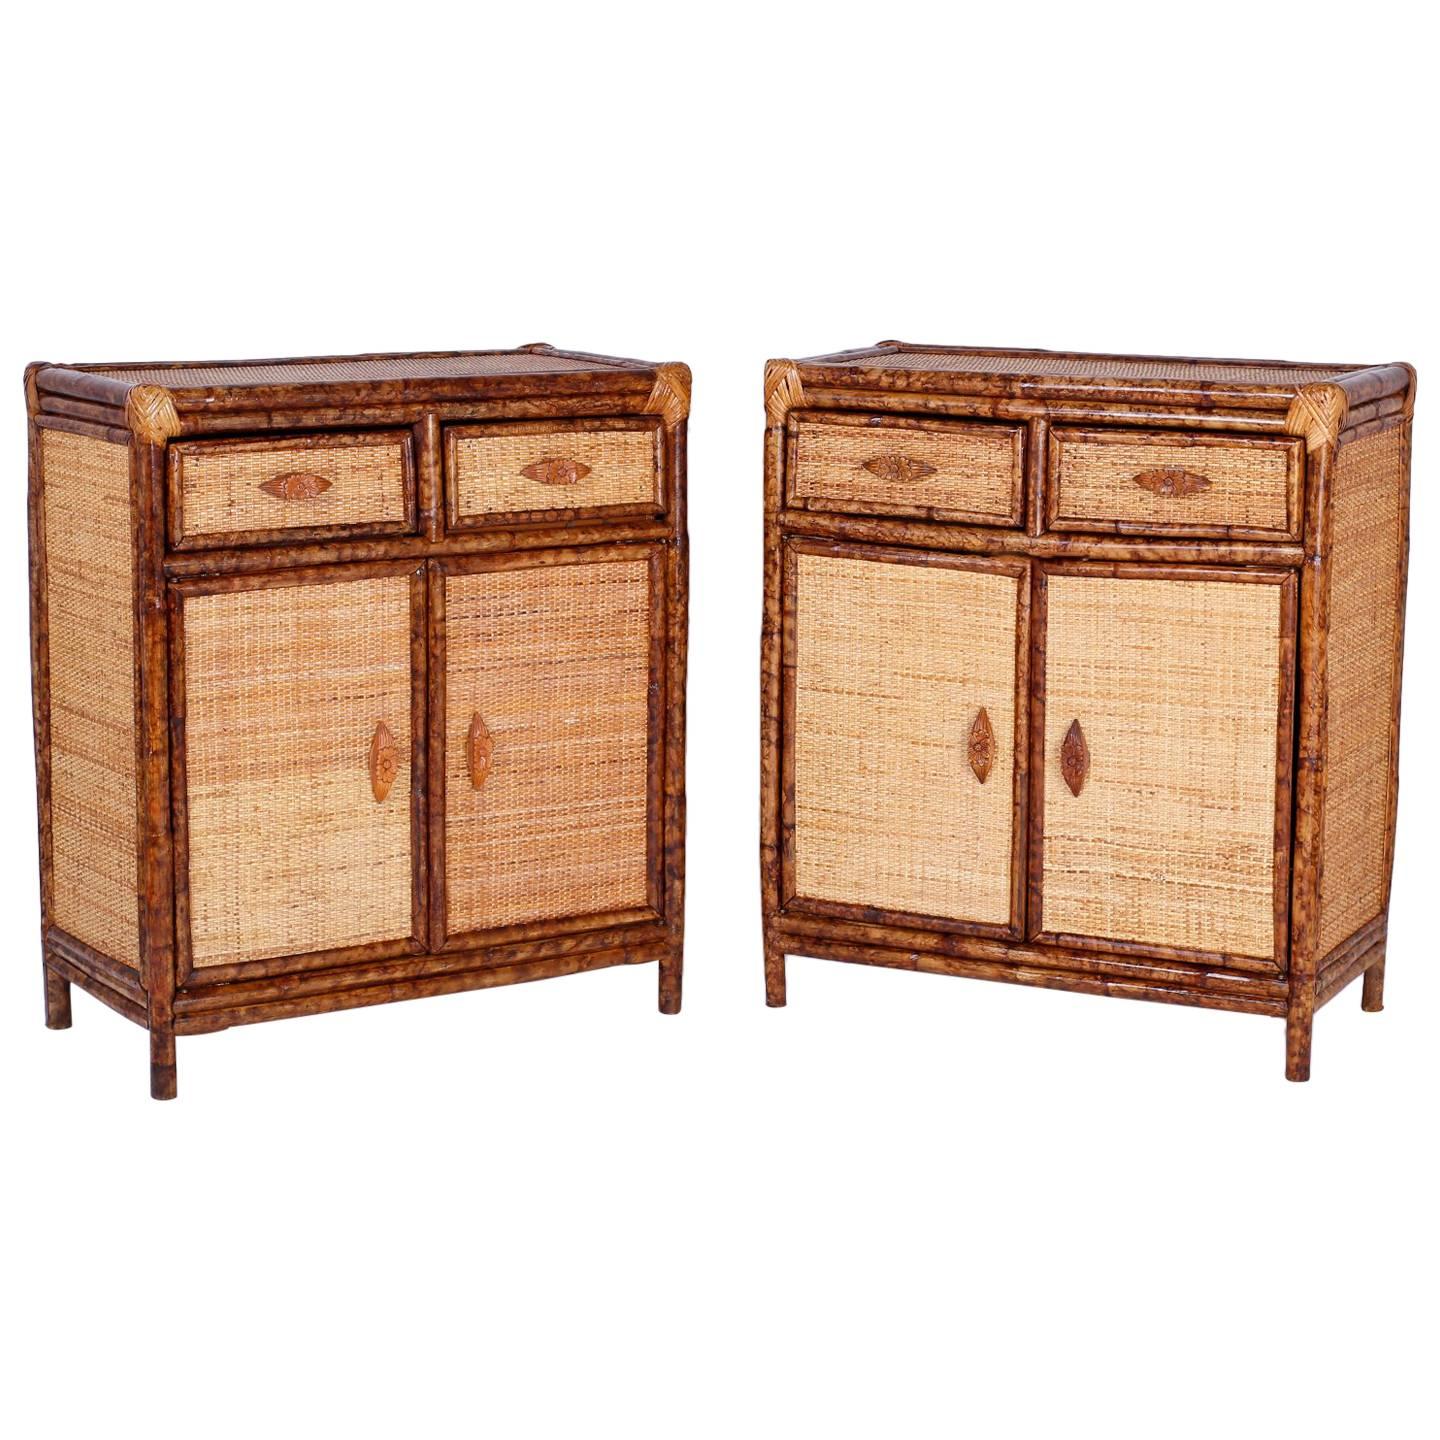 Pair of British Colonial Faux Bamboo Cabinets or Stands